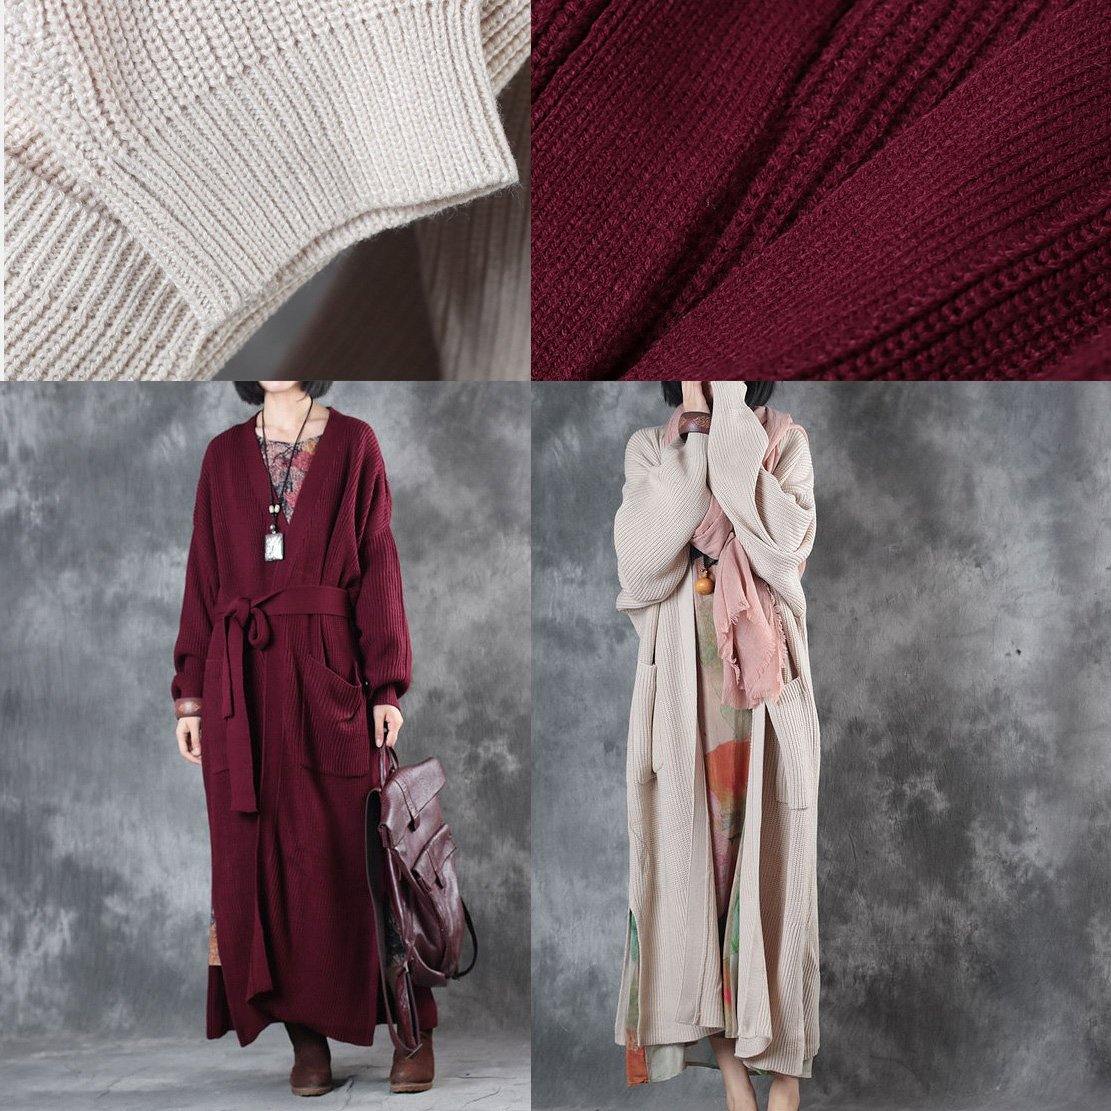 Long casual sweater cardigans plus size pockets tie waist knit trench coat - Omychic